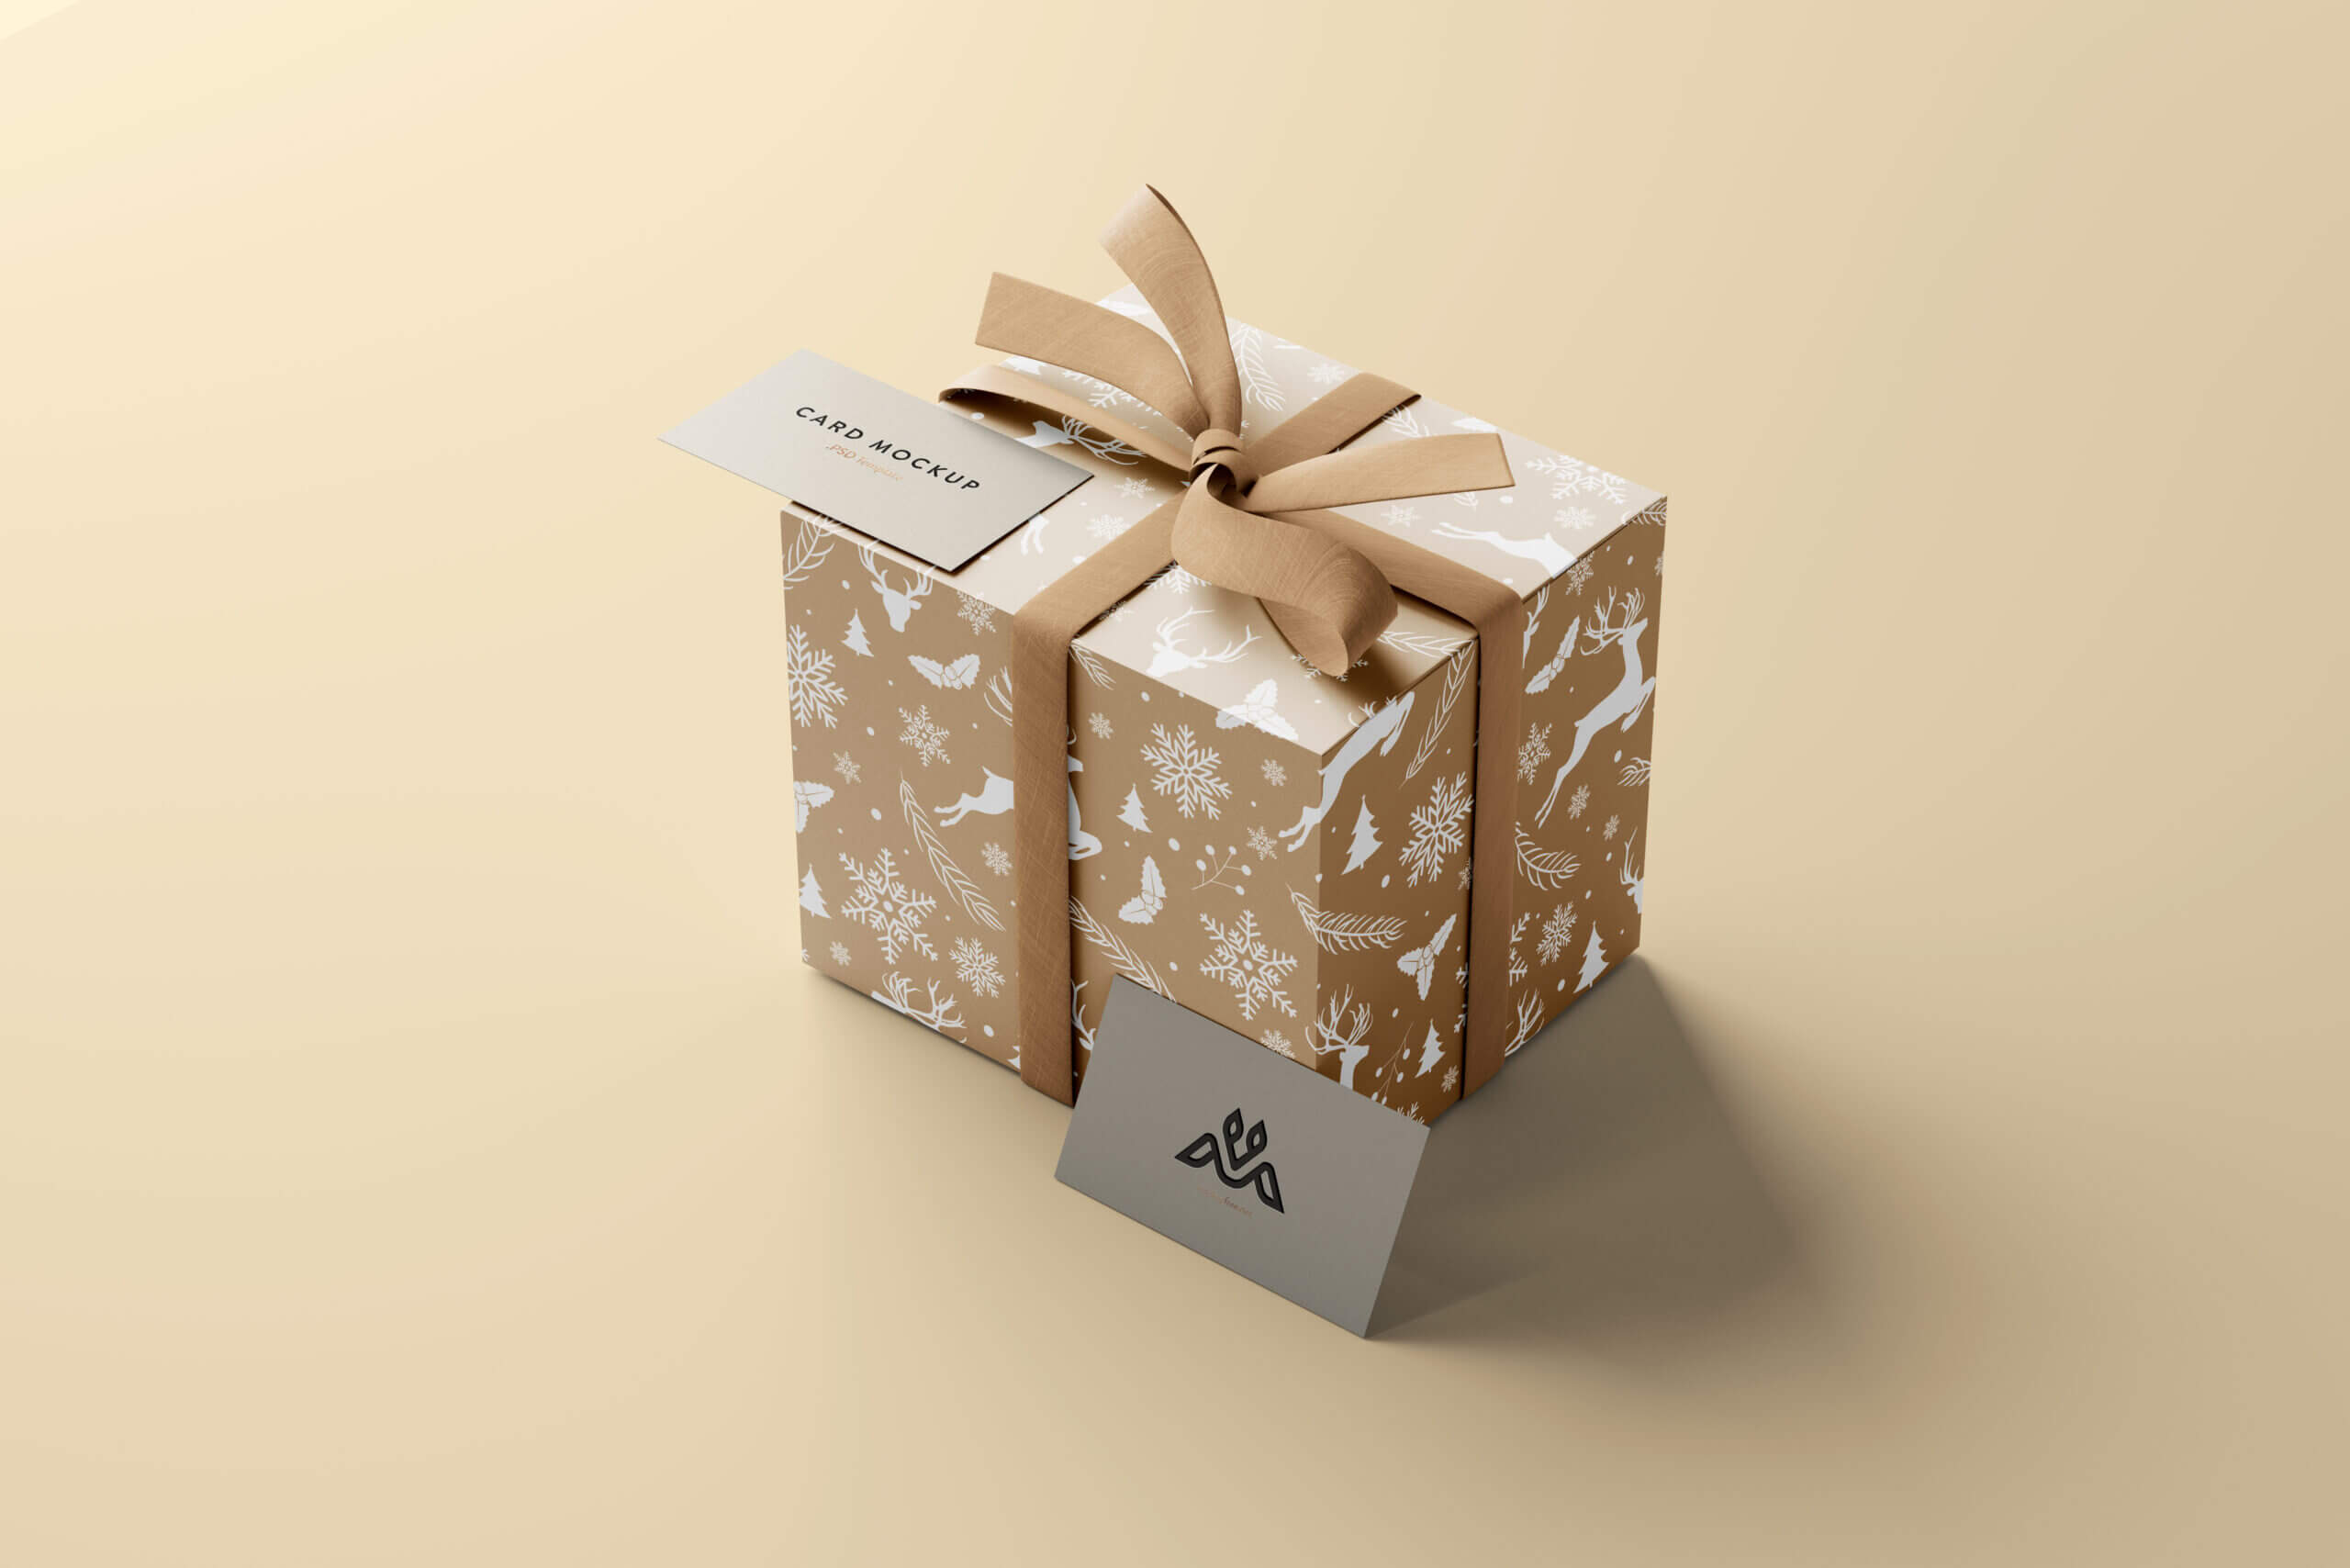 5 Free Wrapped With Ribbon Square Gift Box Mockup PSD Files5